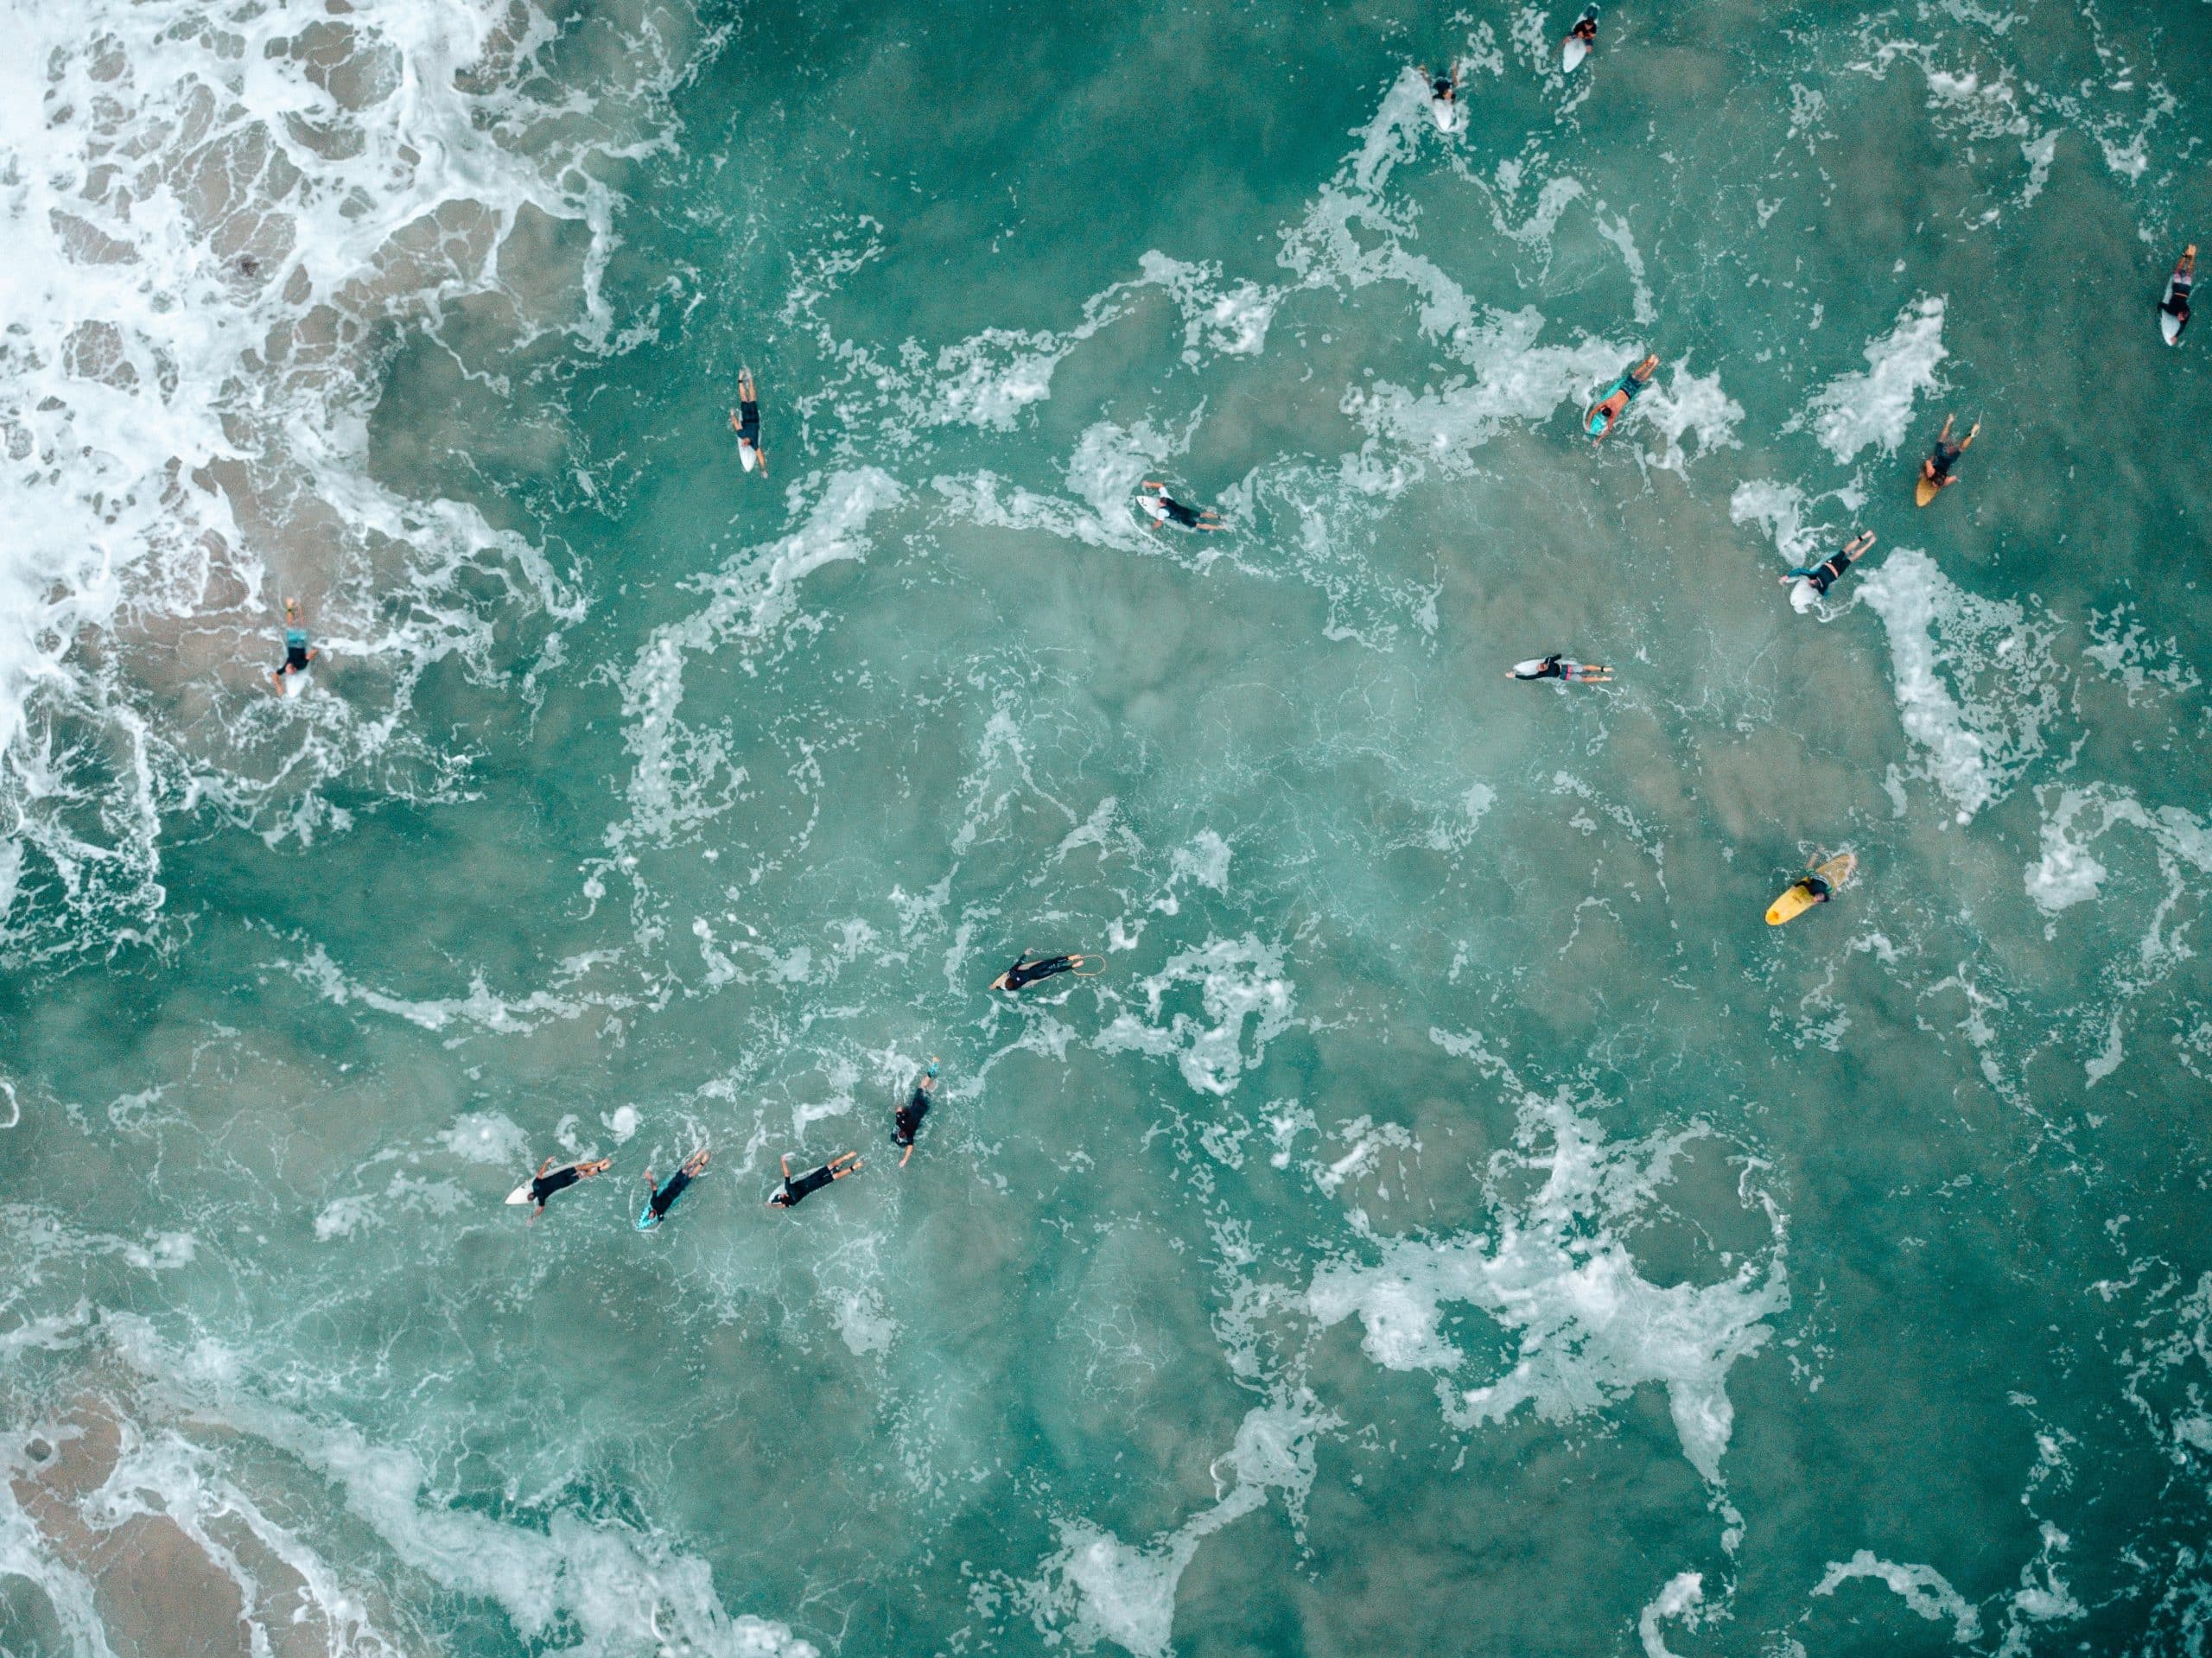 Central Coast aerial shot of surfers at beach